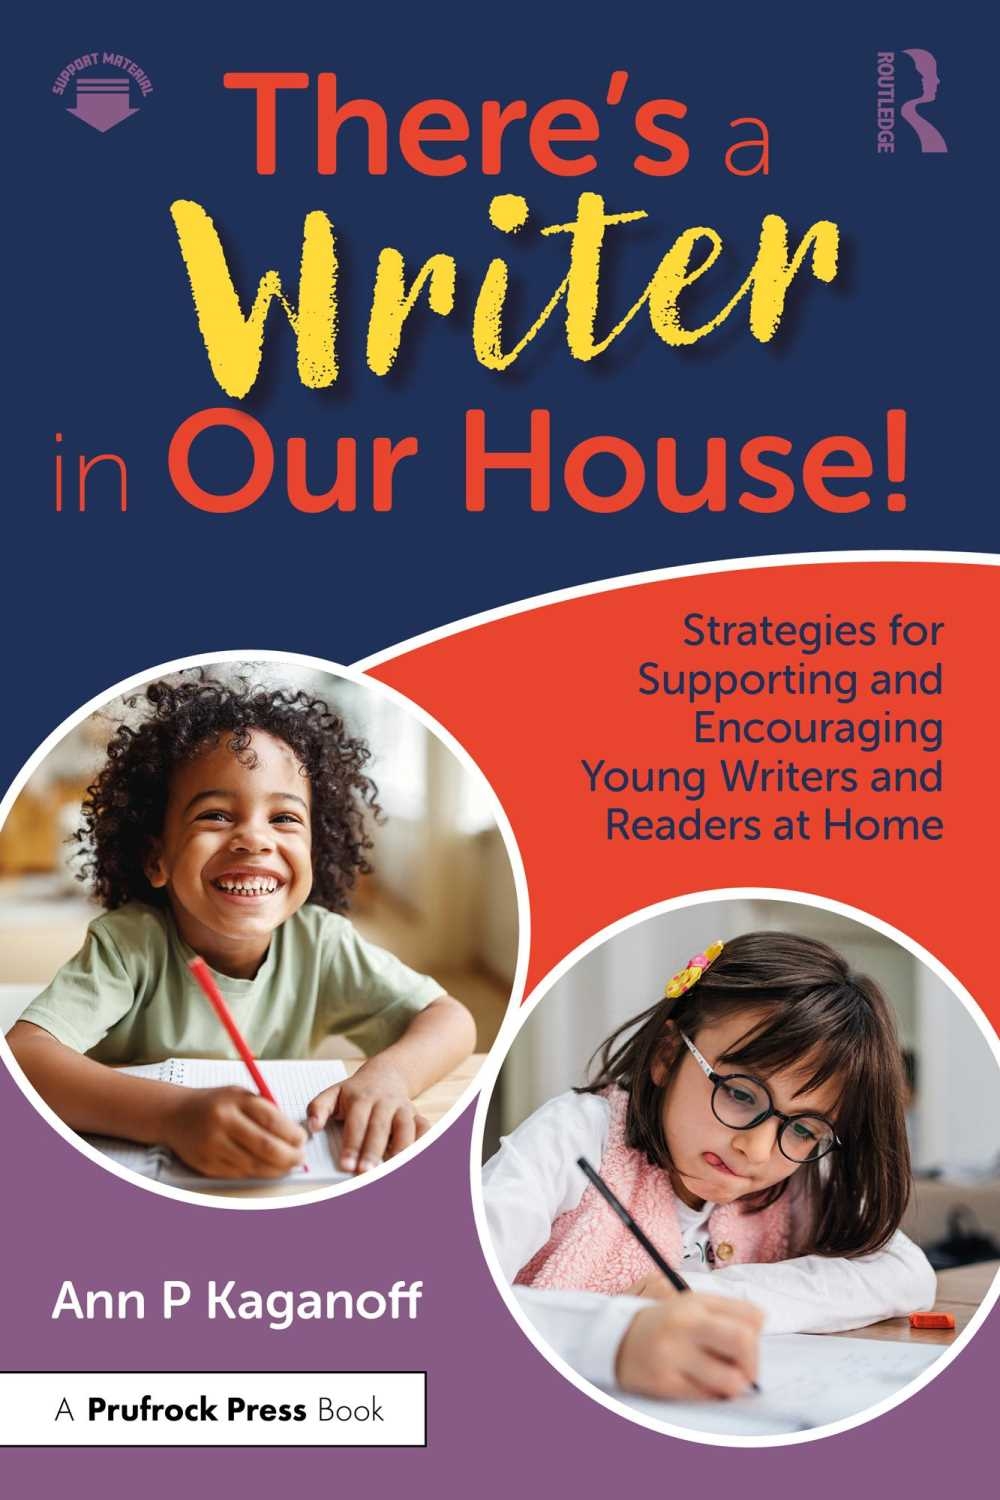 There’s a Writer in Our House! Strategies for Supporting and Encouraging Young Writers and Readers at Home